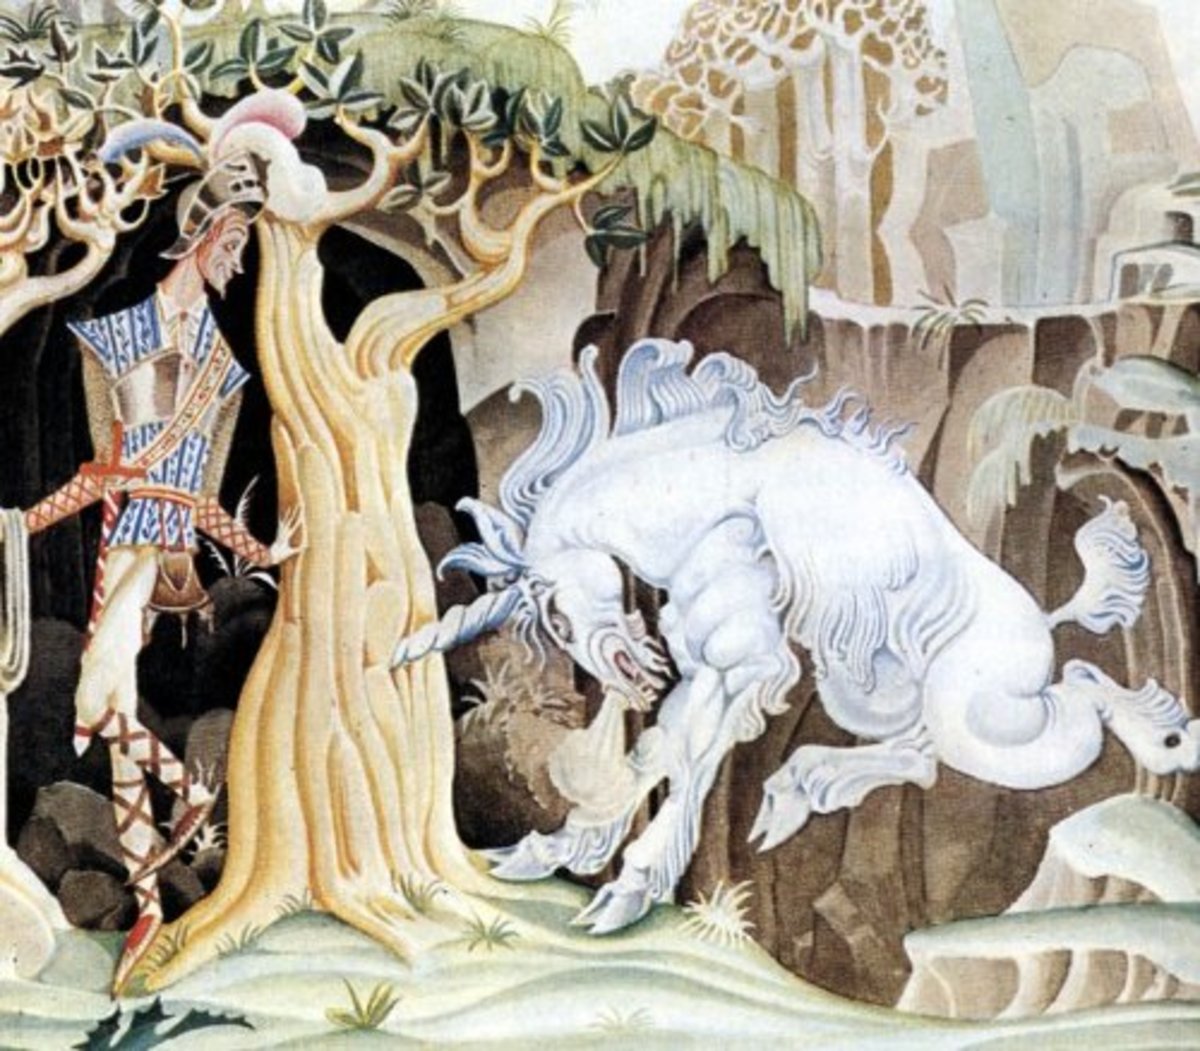 Here we show a portion of 'The Valiant Tailor' - a design by Kay Nielsen from his suite published in 